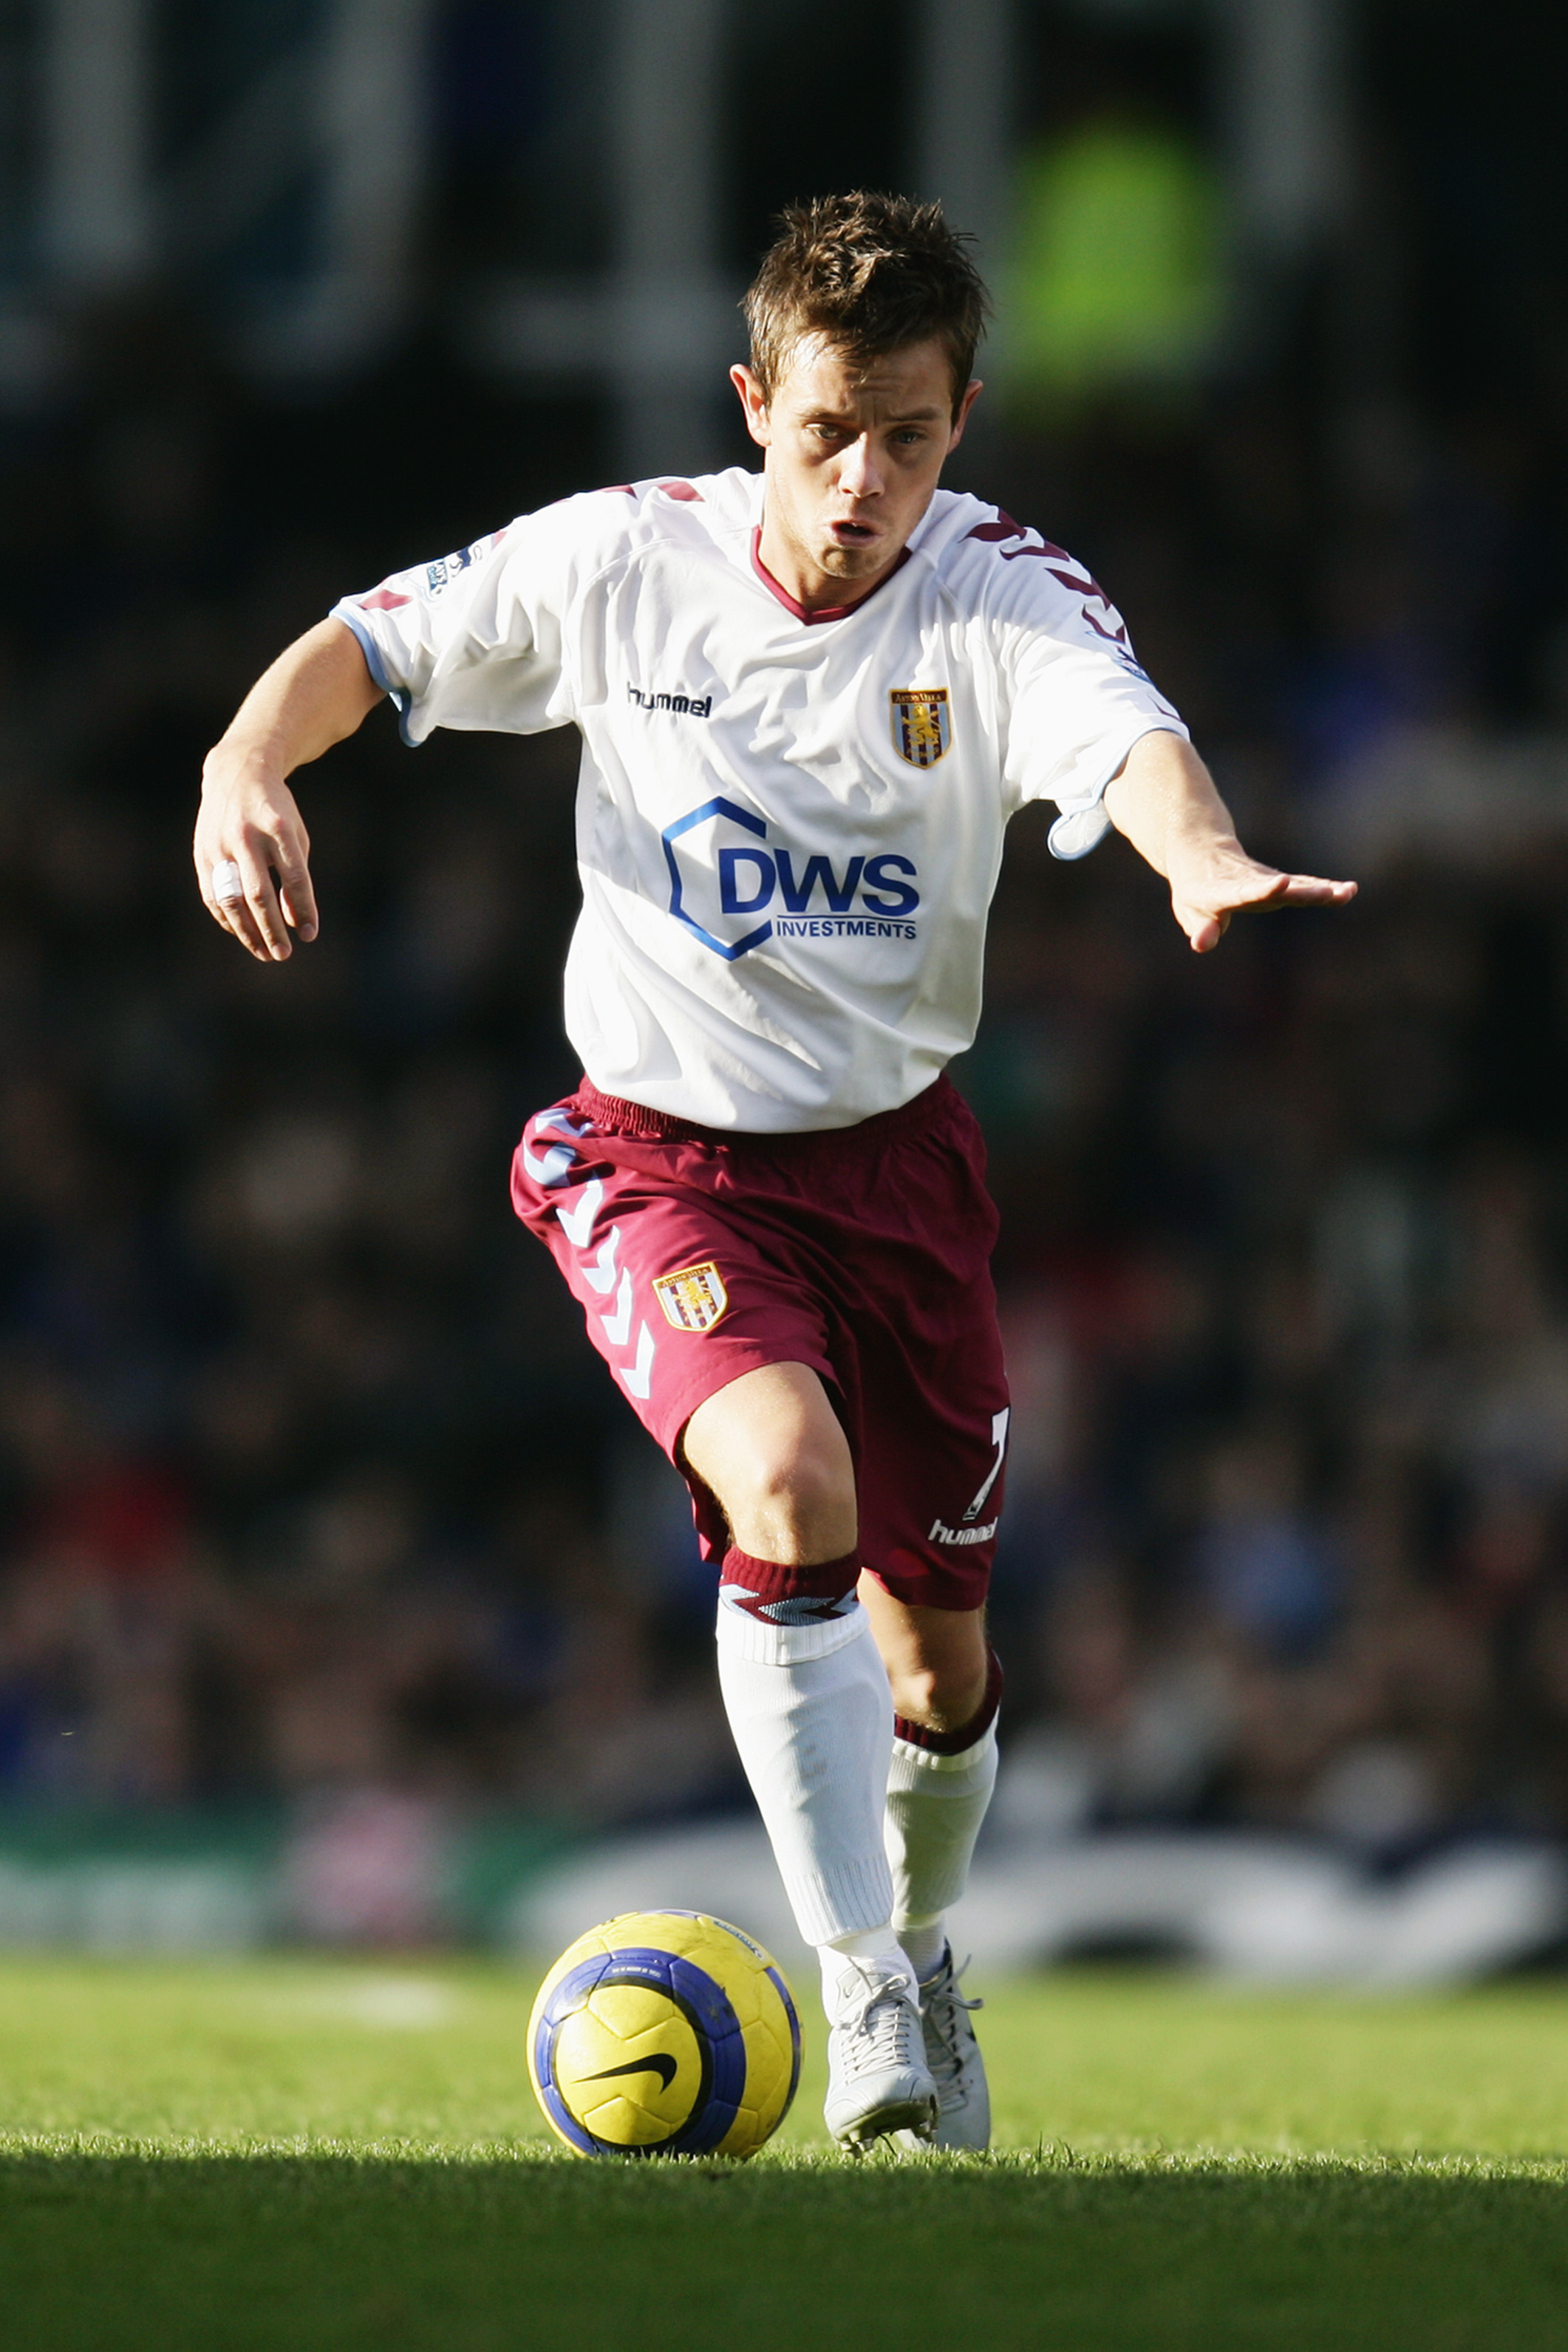 PORTSMOUTH, ENGLAND - FEBRUARY 12:  Lee Hendrie of Aston Villa in action during the Barclays Premiership match between Portsmouth and Aston Villa at Fratton Park on February 12, 2005 in Portsmouth, England.  (Photo by Paul Gilham/Getty Images)